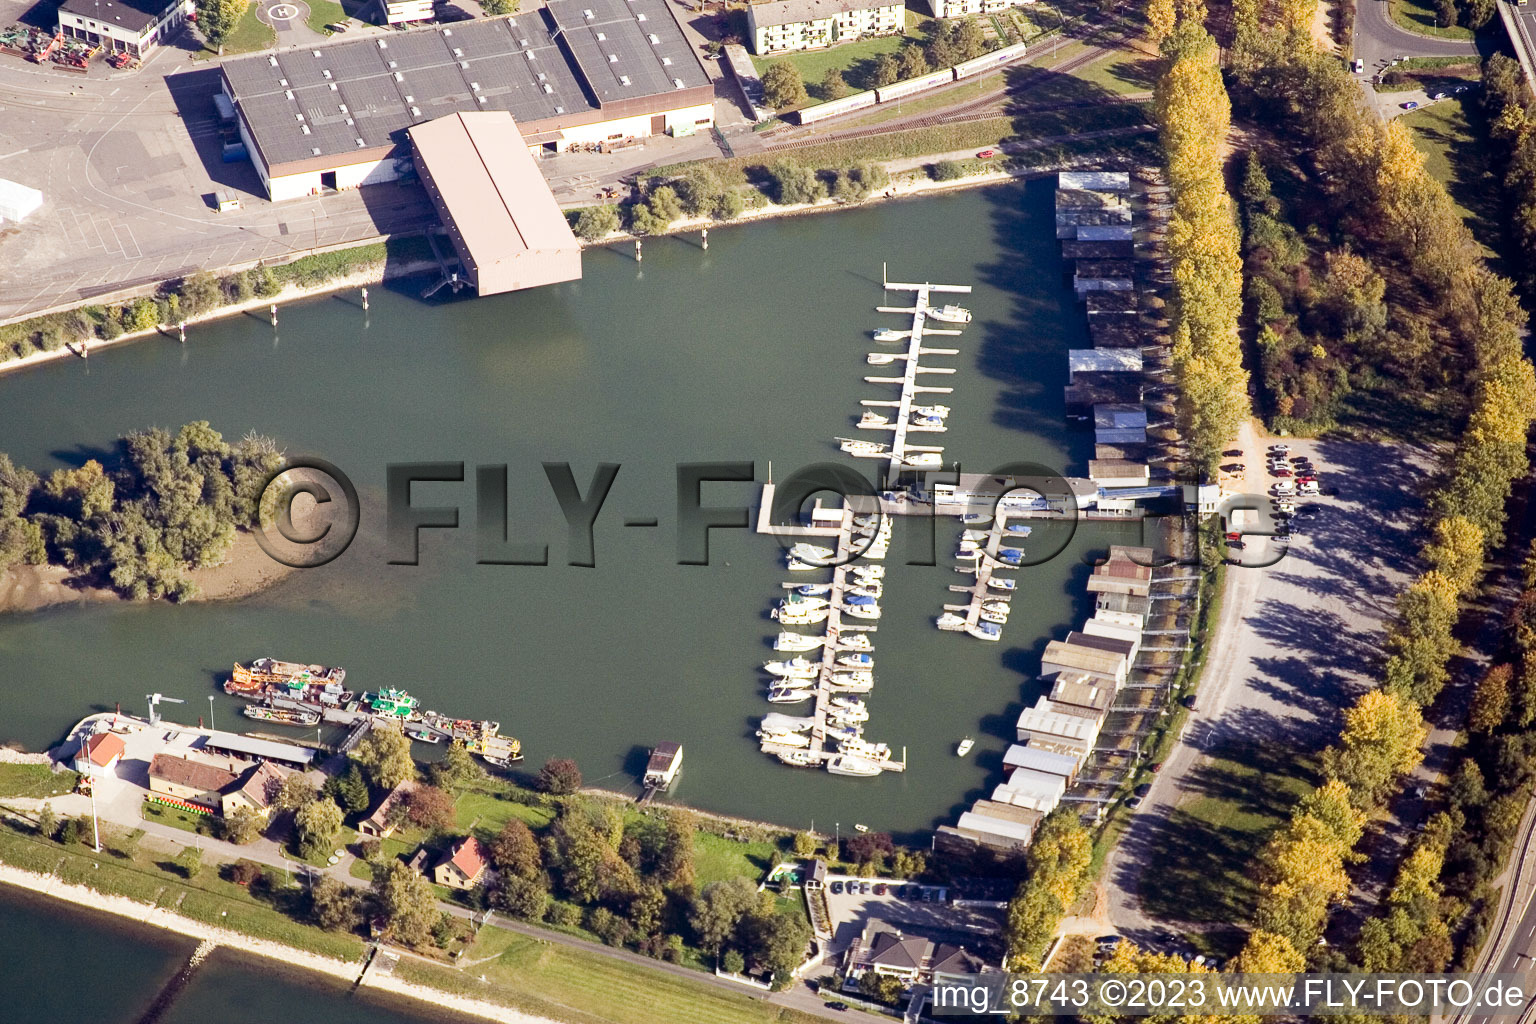 Maxau marina from the west in the district Knielingen in Karlsruhe in the state Baden-Wuerttemberg, Germany